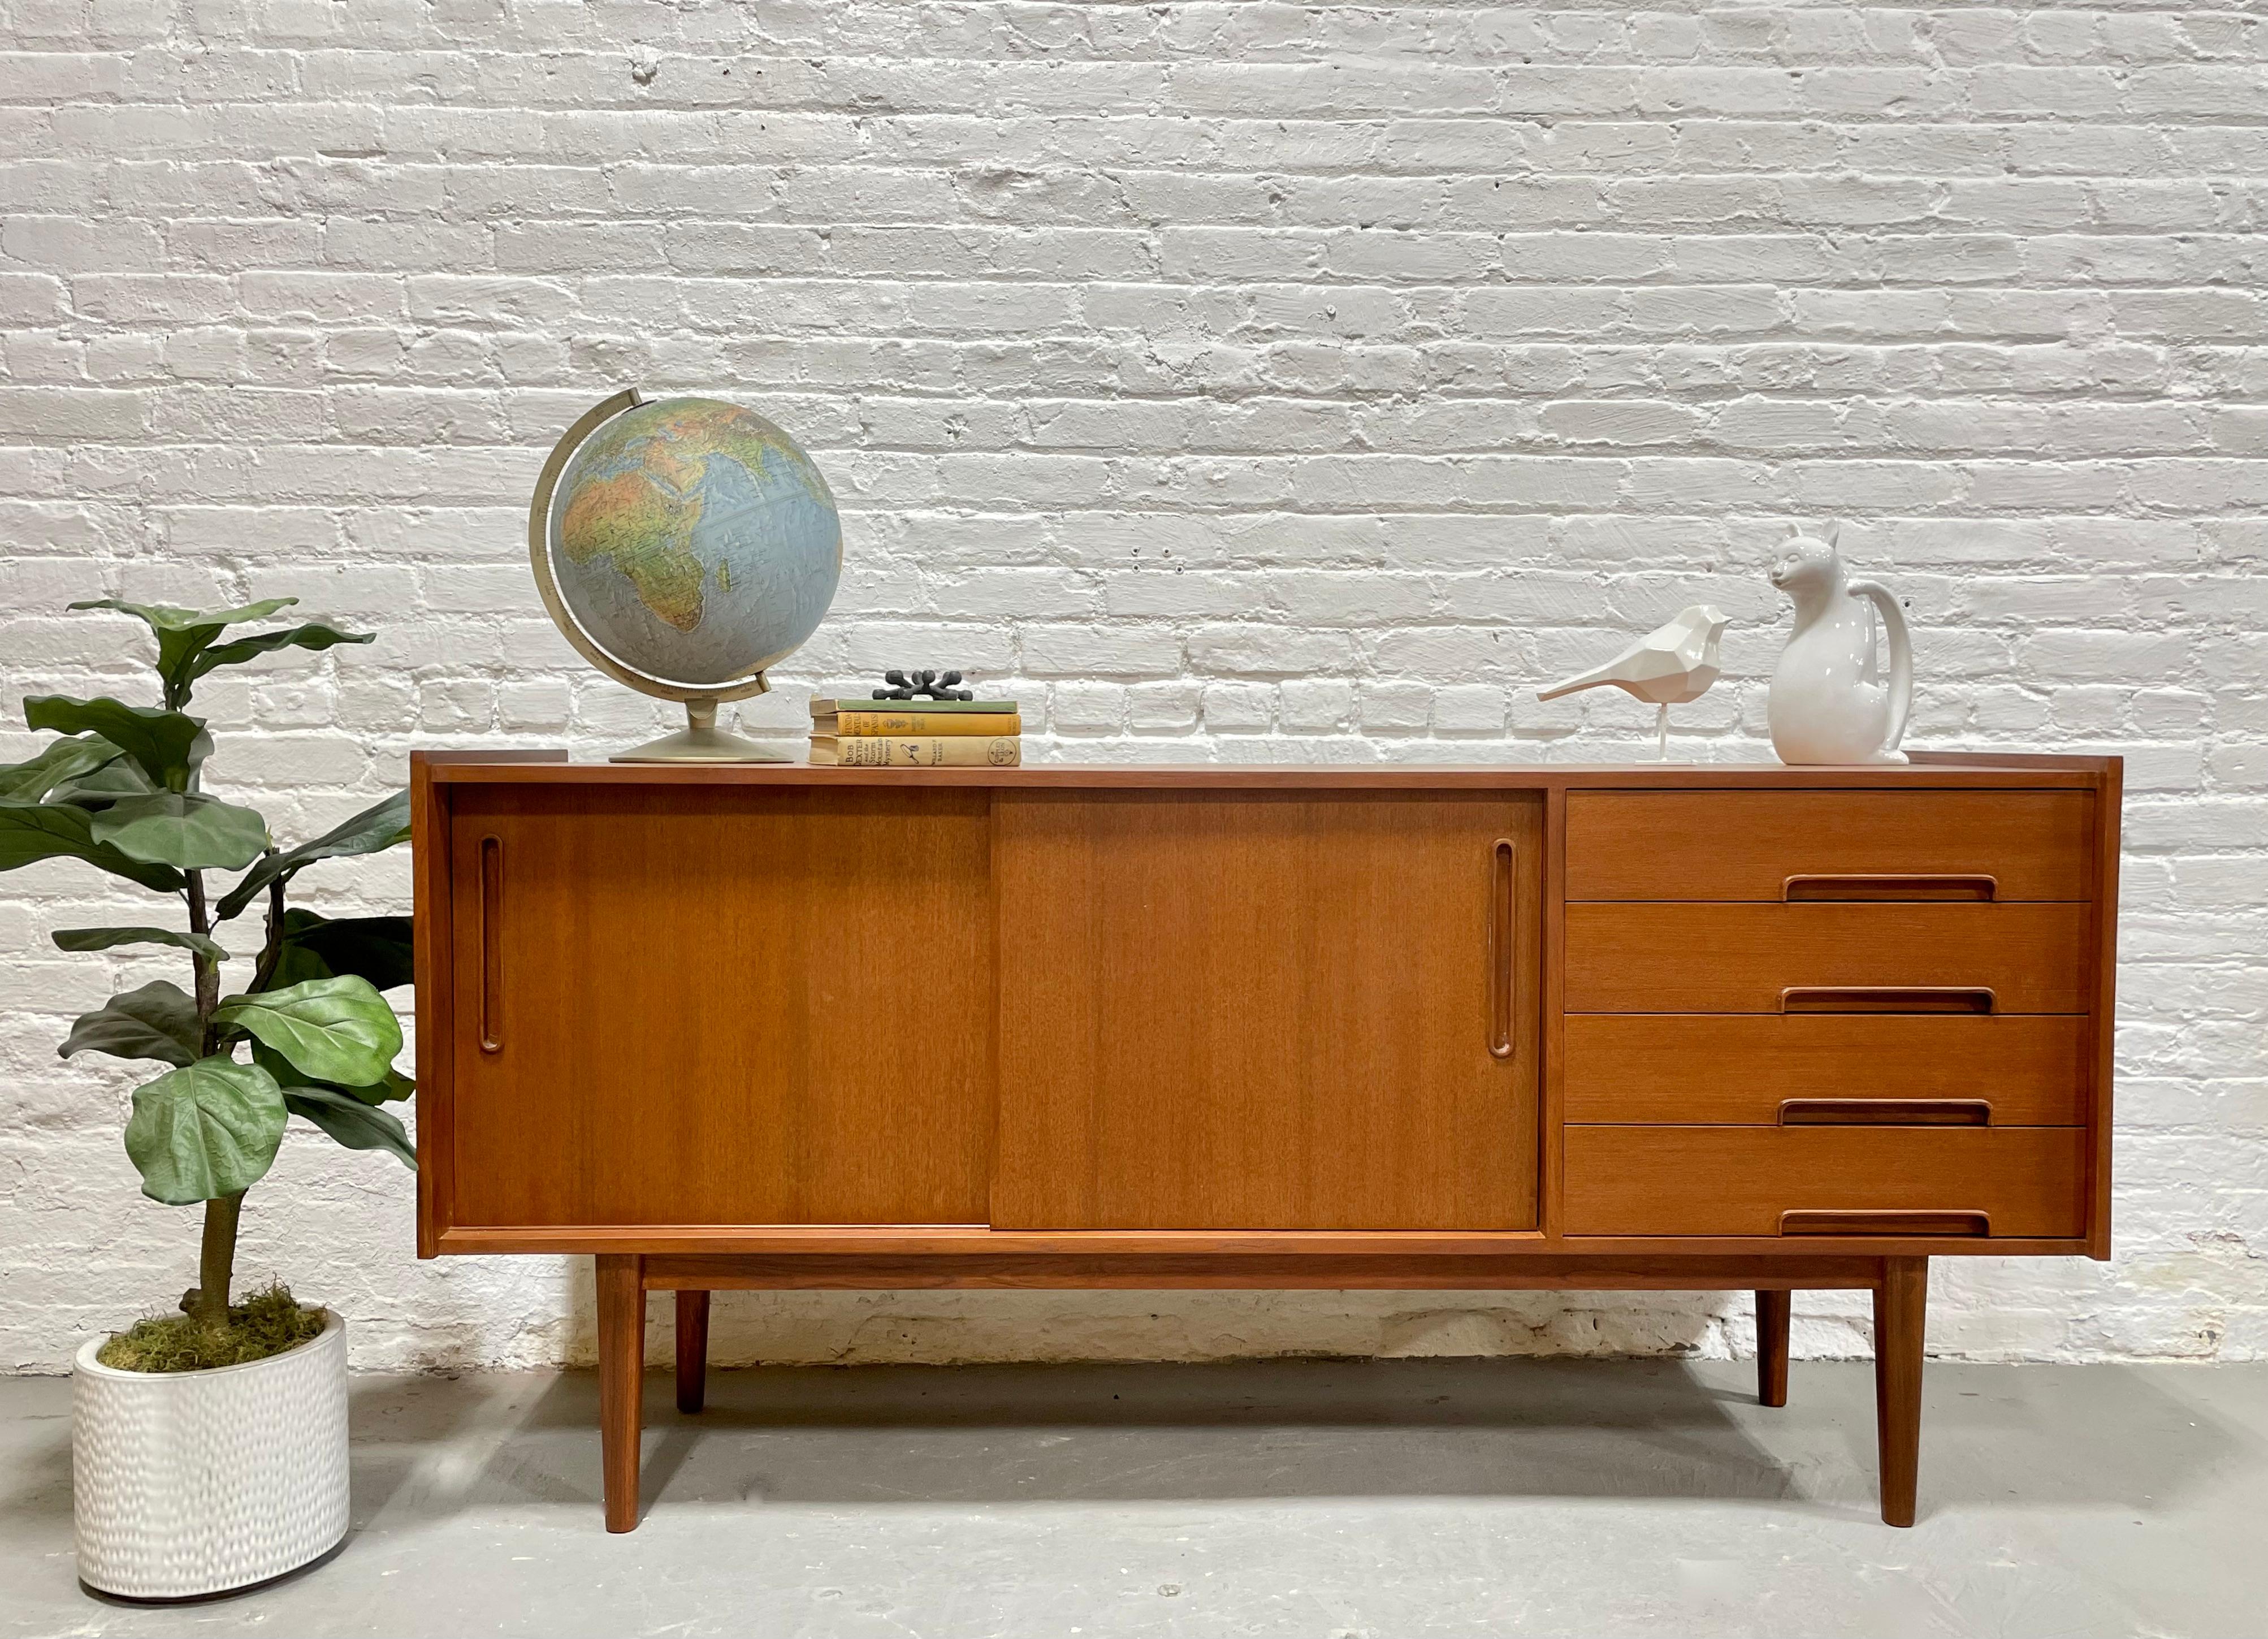 Mid Century Modern styled Handcrafted Credenza / Media Stand. This beauty features exquisite inset hand pulls along the doors and drawers with recessed trim. Stunning wood grains and finished back allow you to float the credenza in a room. Excellent